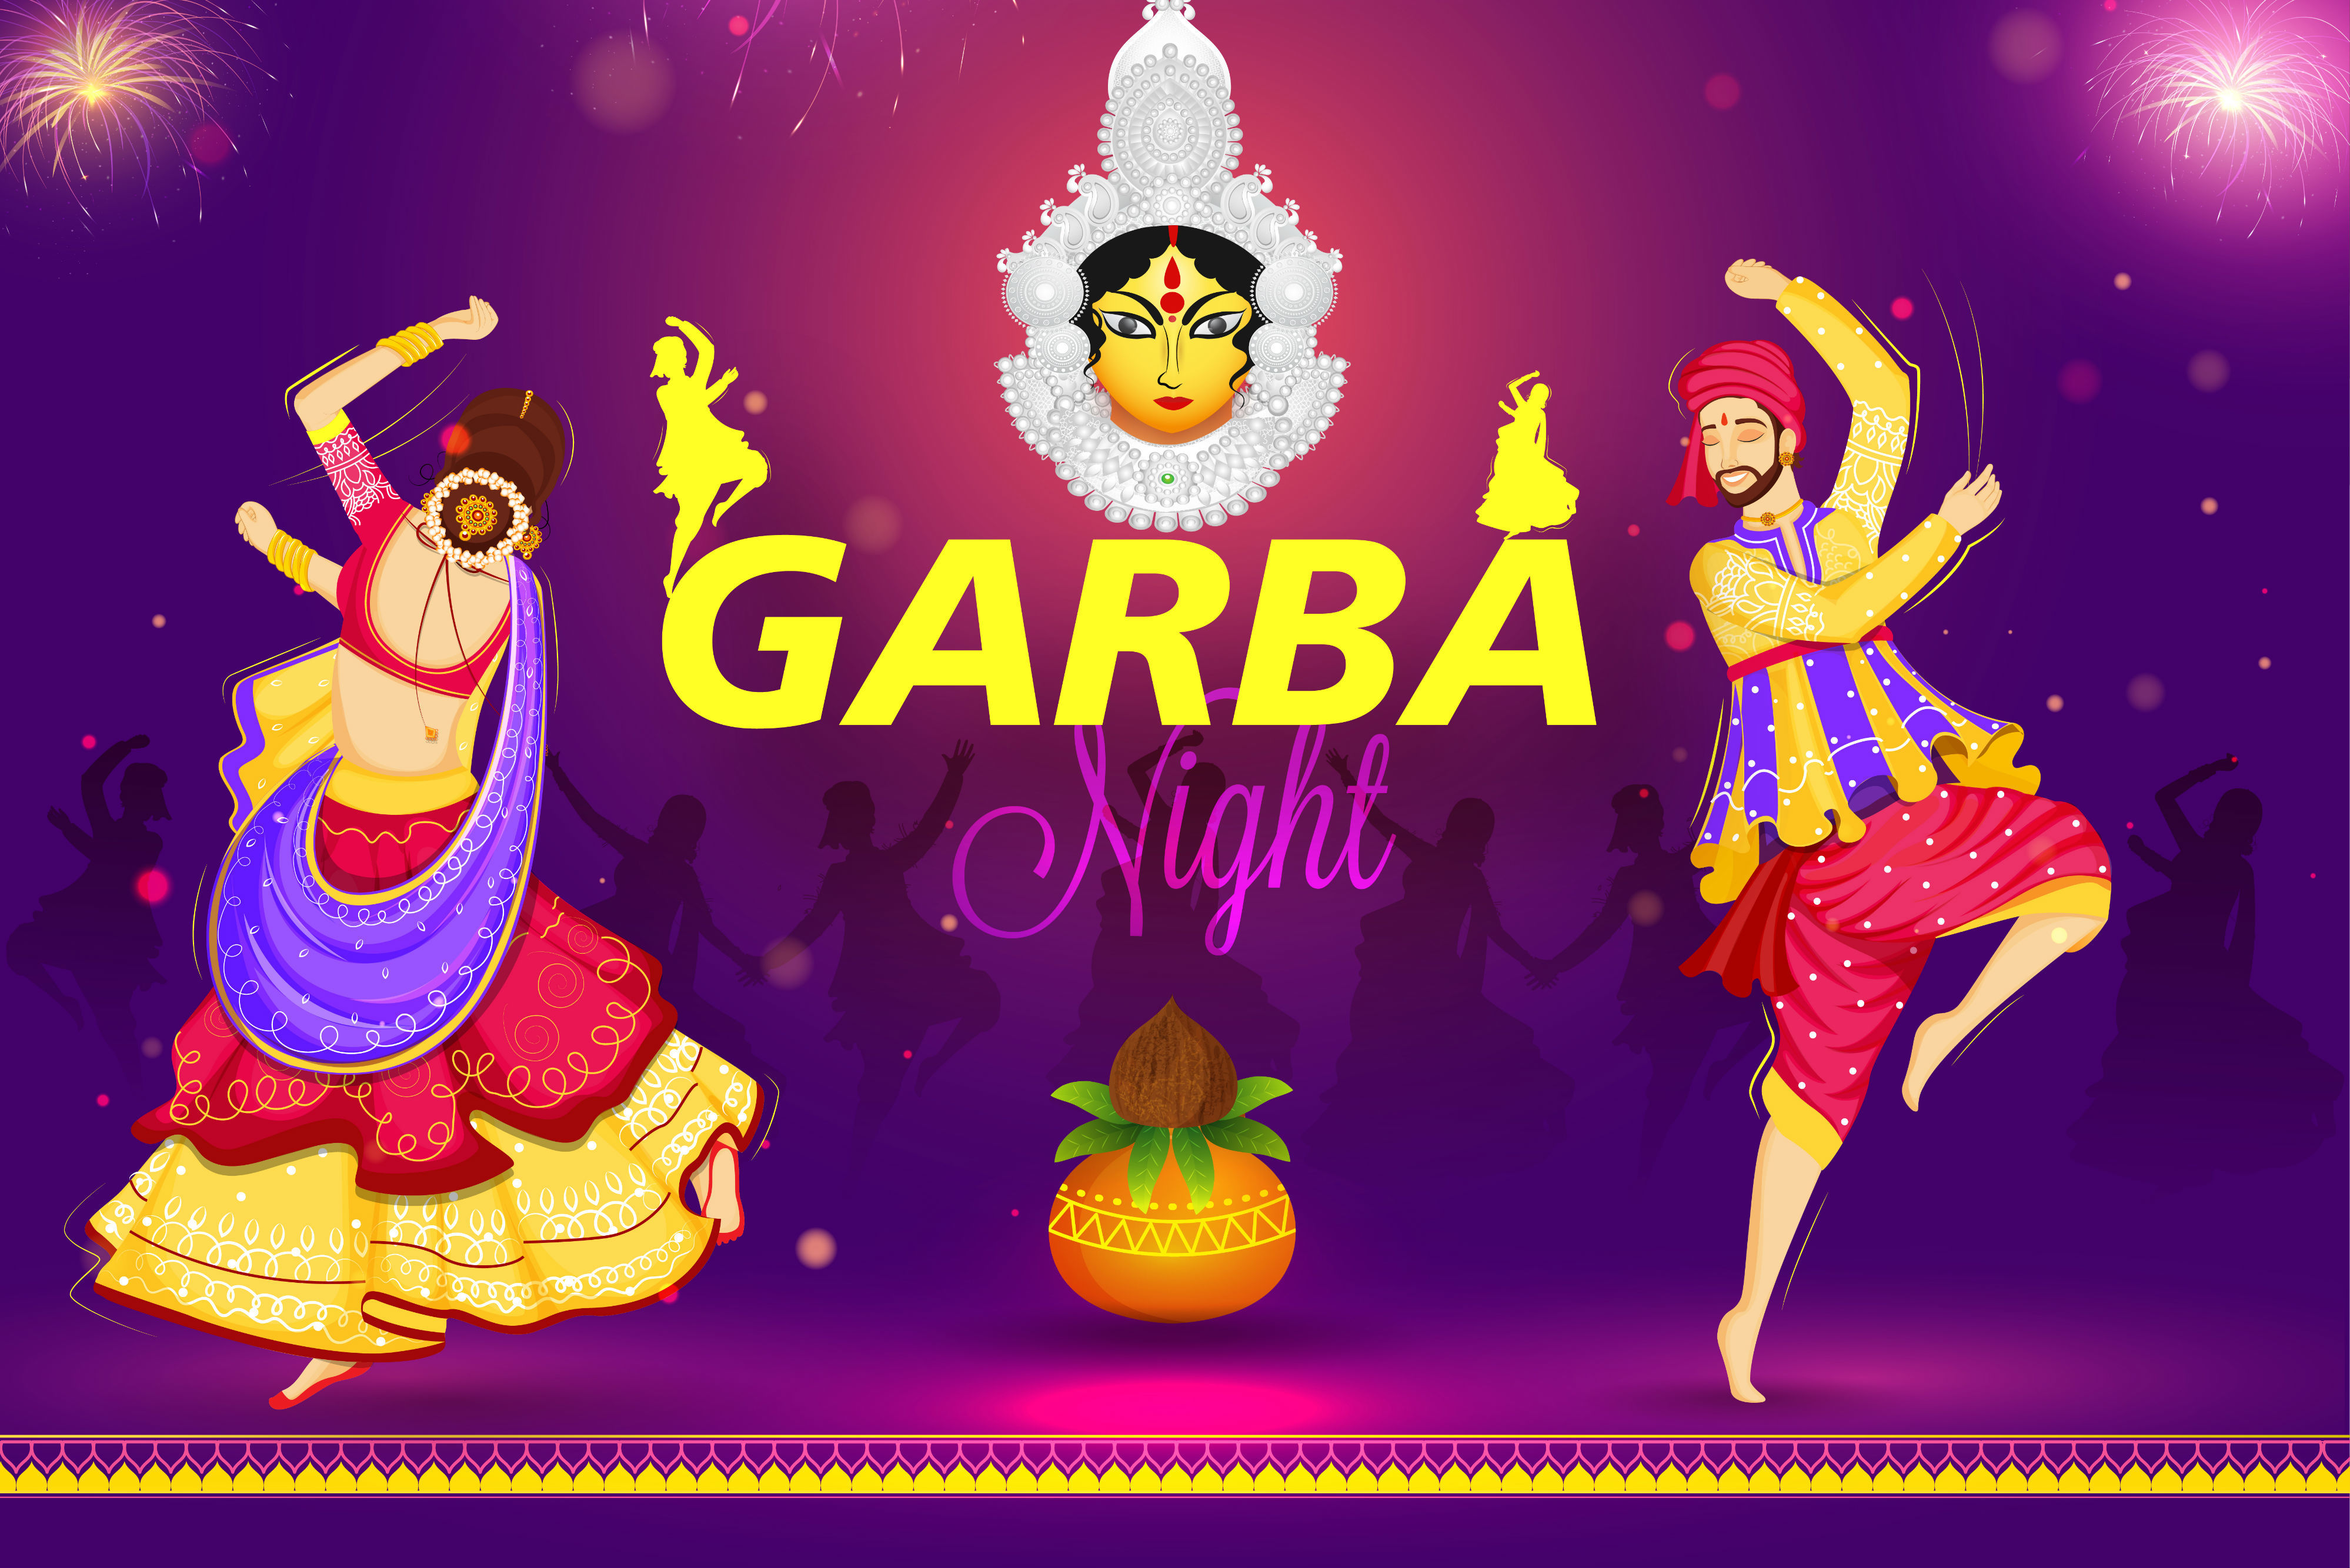 Places in Gujarat for Navratri for garba Night | Times of India Travel